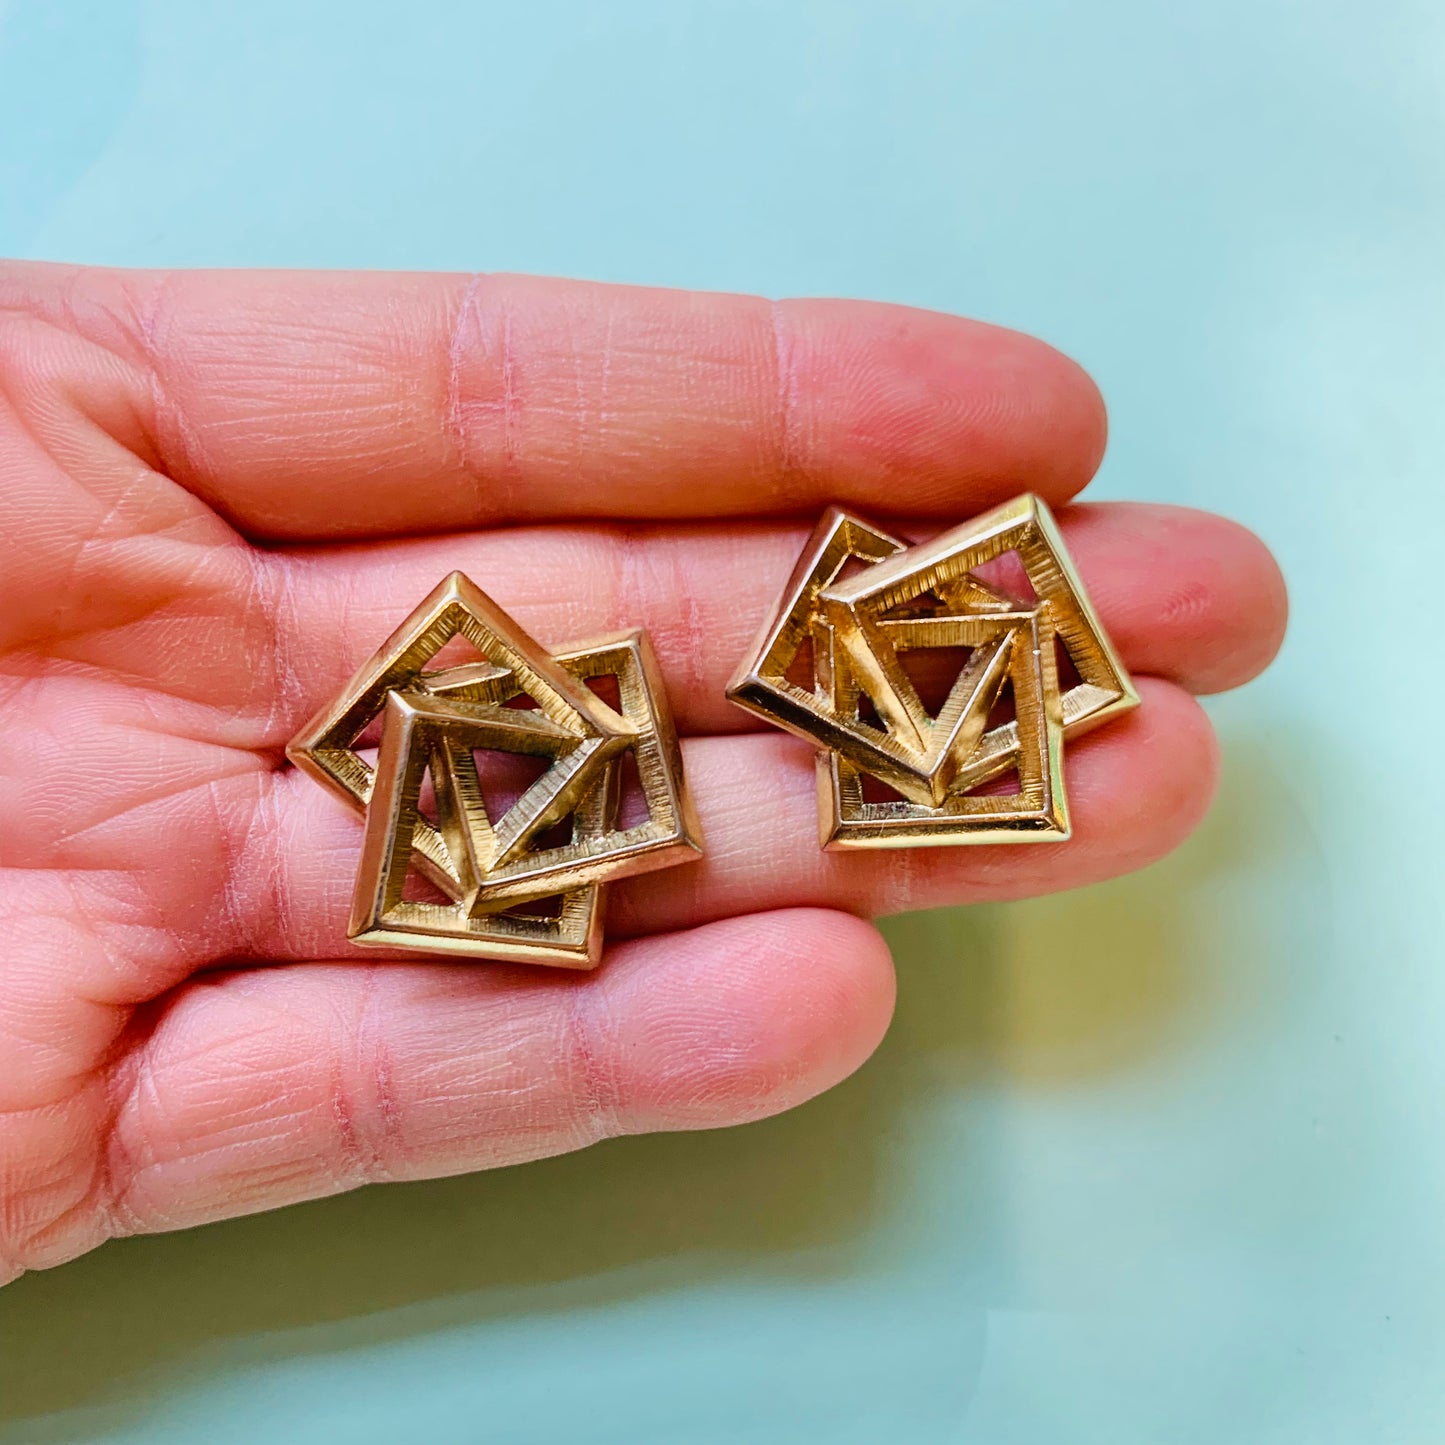 Rare 1960s French brass puzzle stud earrings